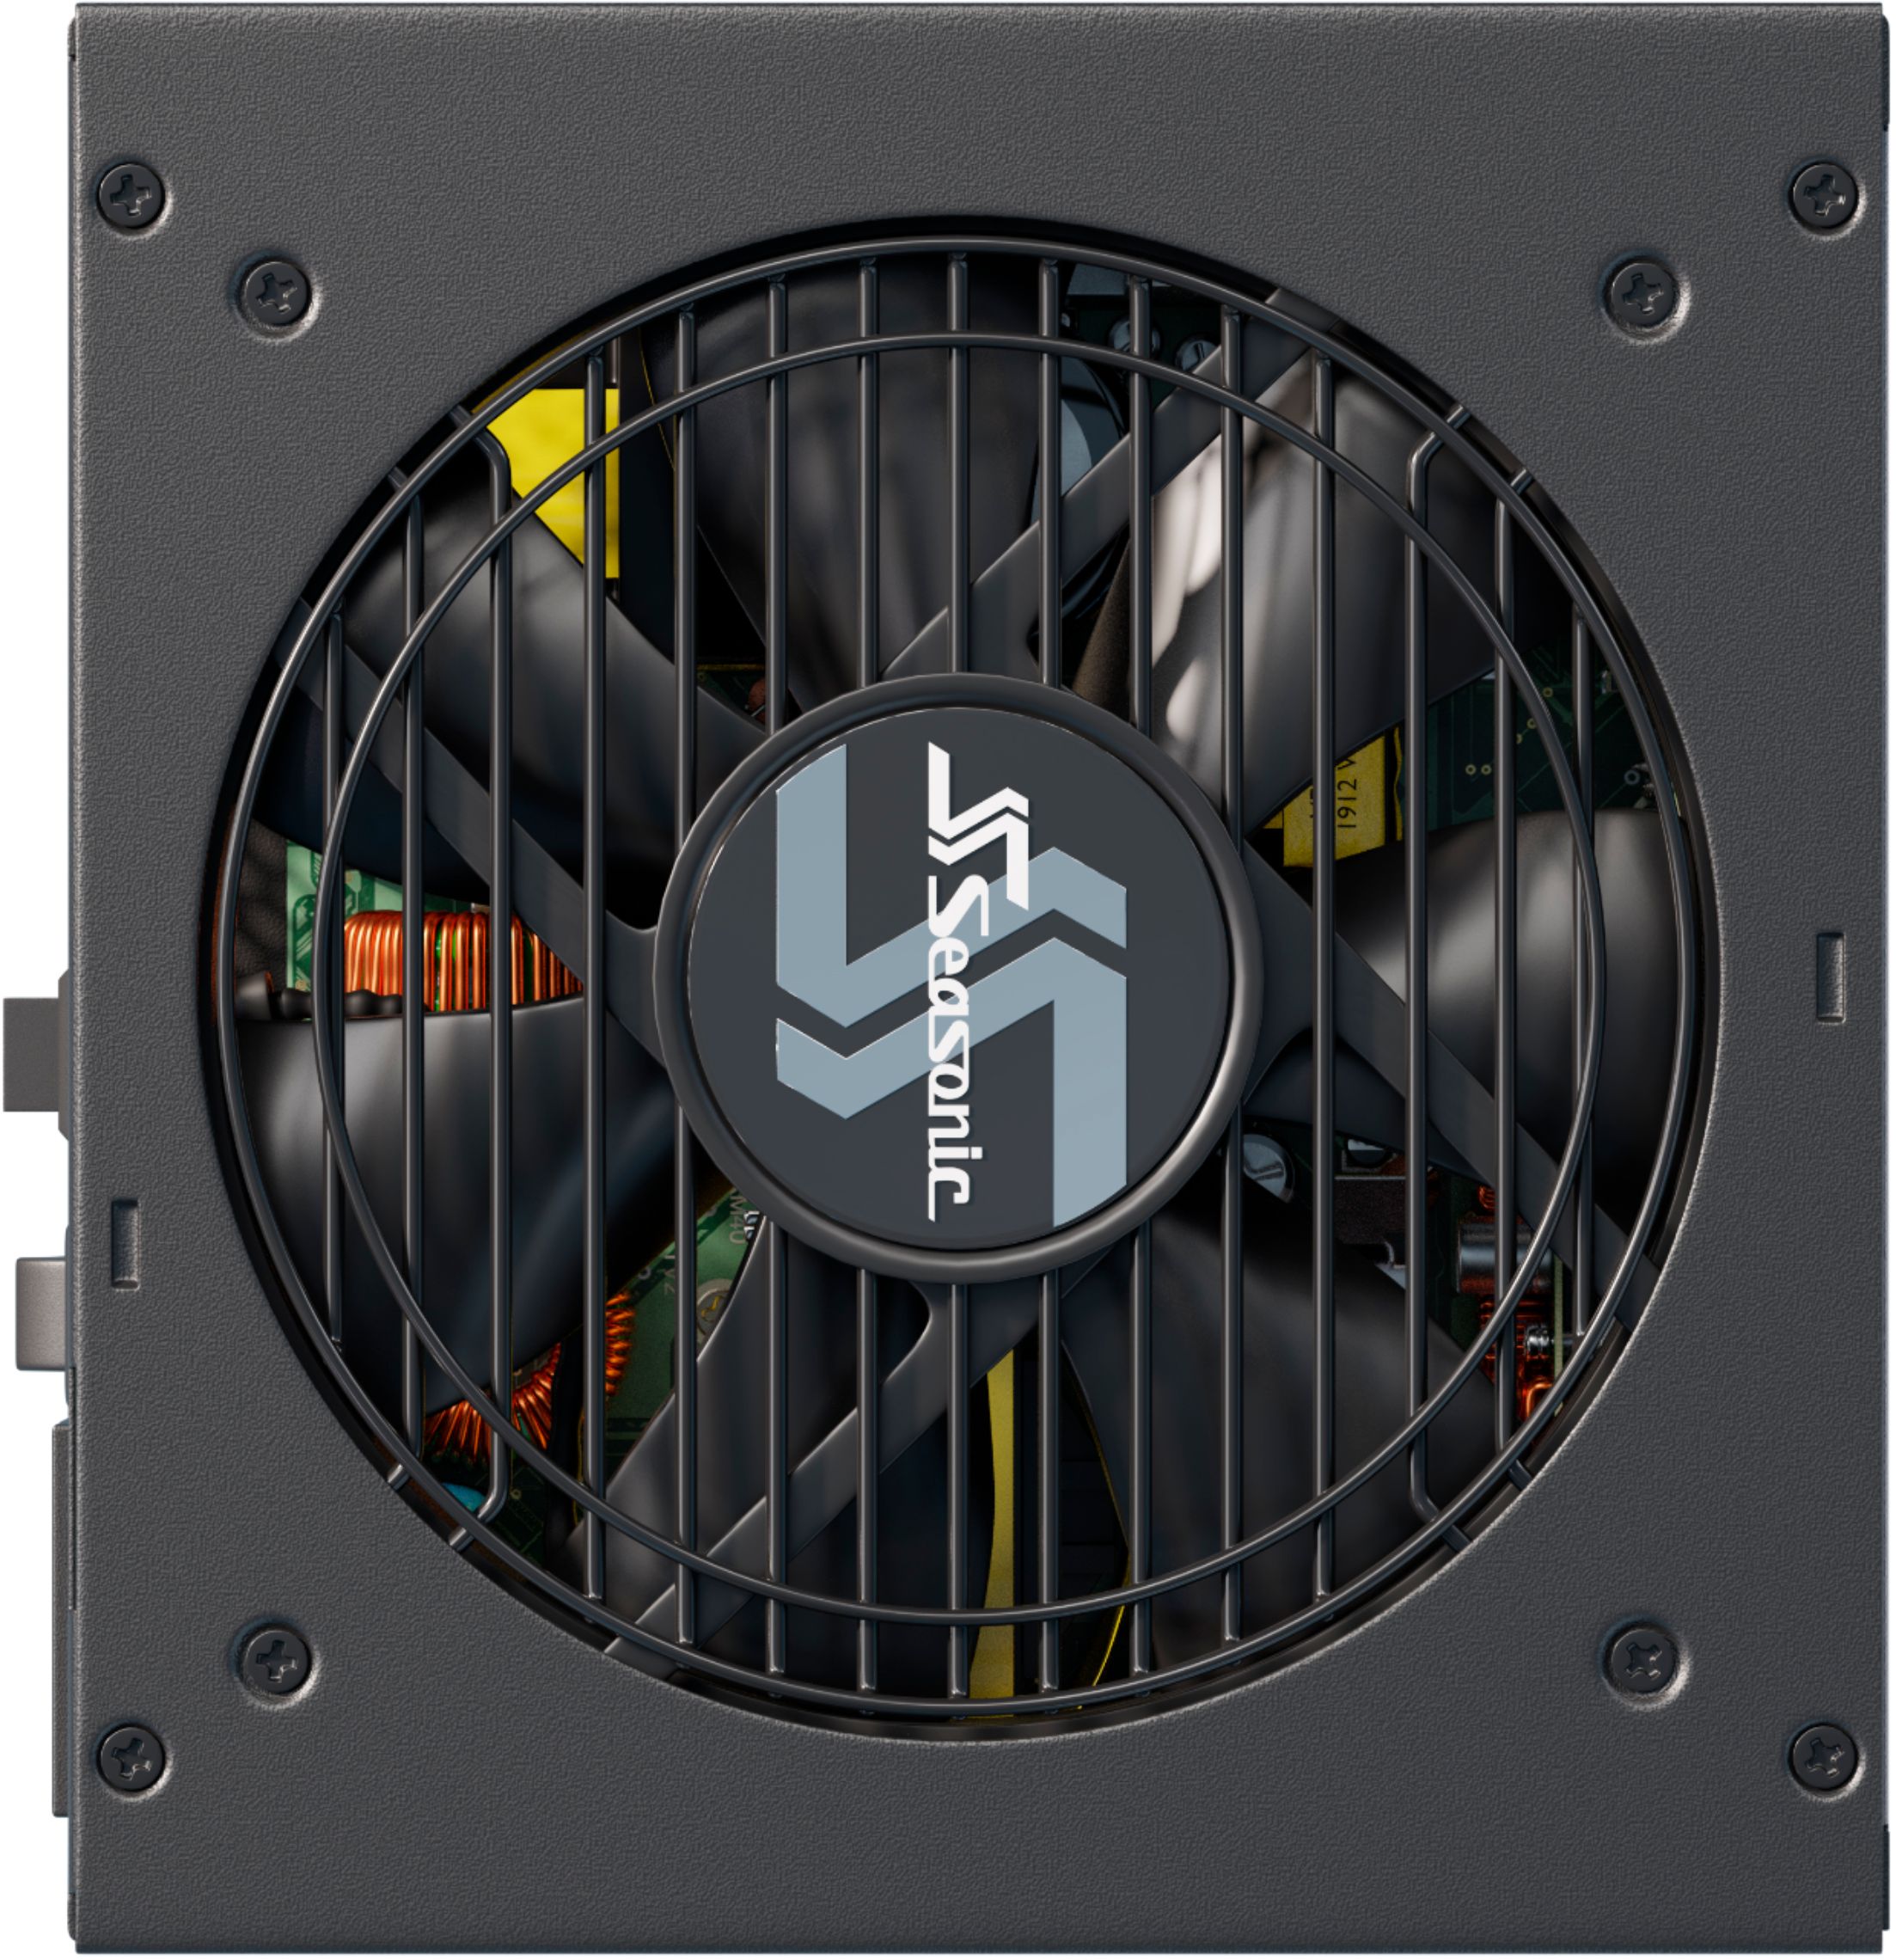 Seasonic PRIME PX-850, 850W 80+ Platinum, Full Modular, Fan Control in  Fanless, Silent, and Cooling Mode, 12 Year Warranty, Perfect Power Supply  for Gaming and High-Performance Systems, SSR-850PD. 